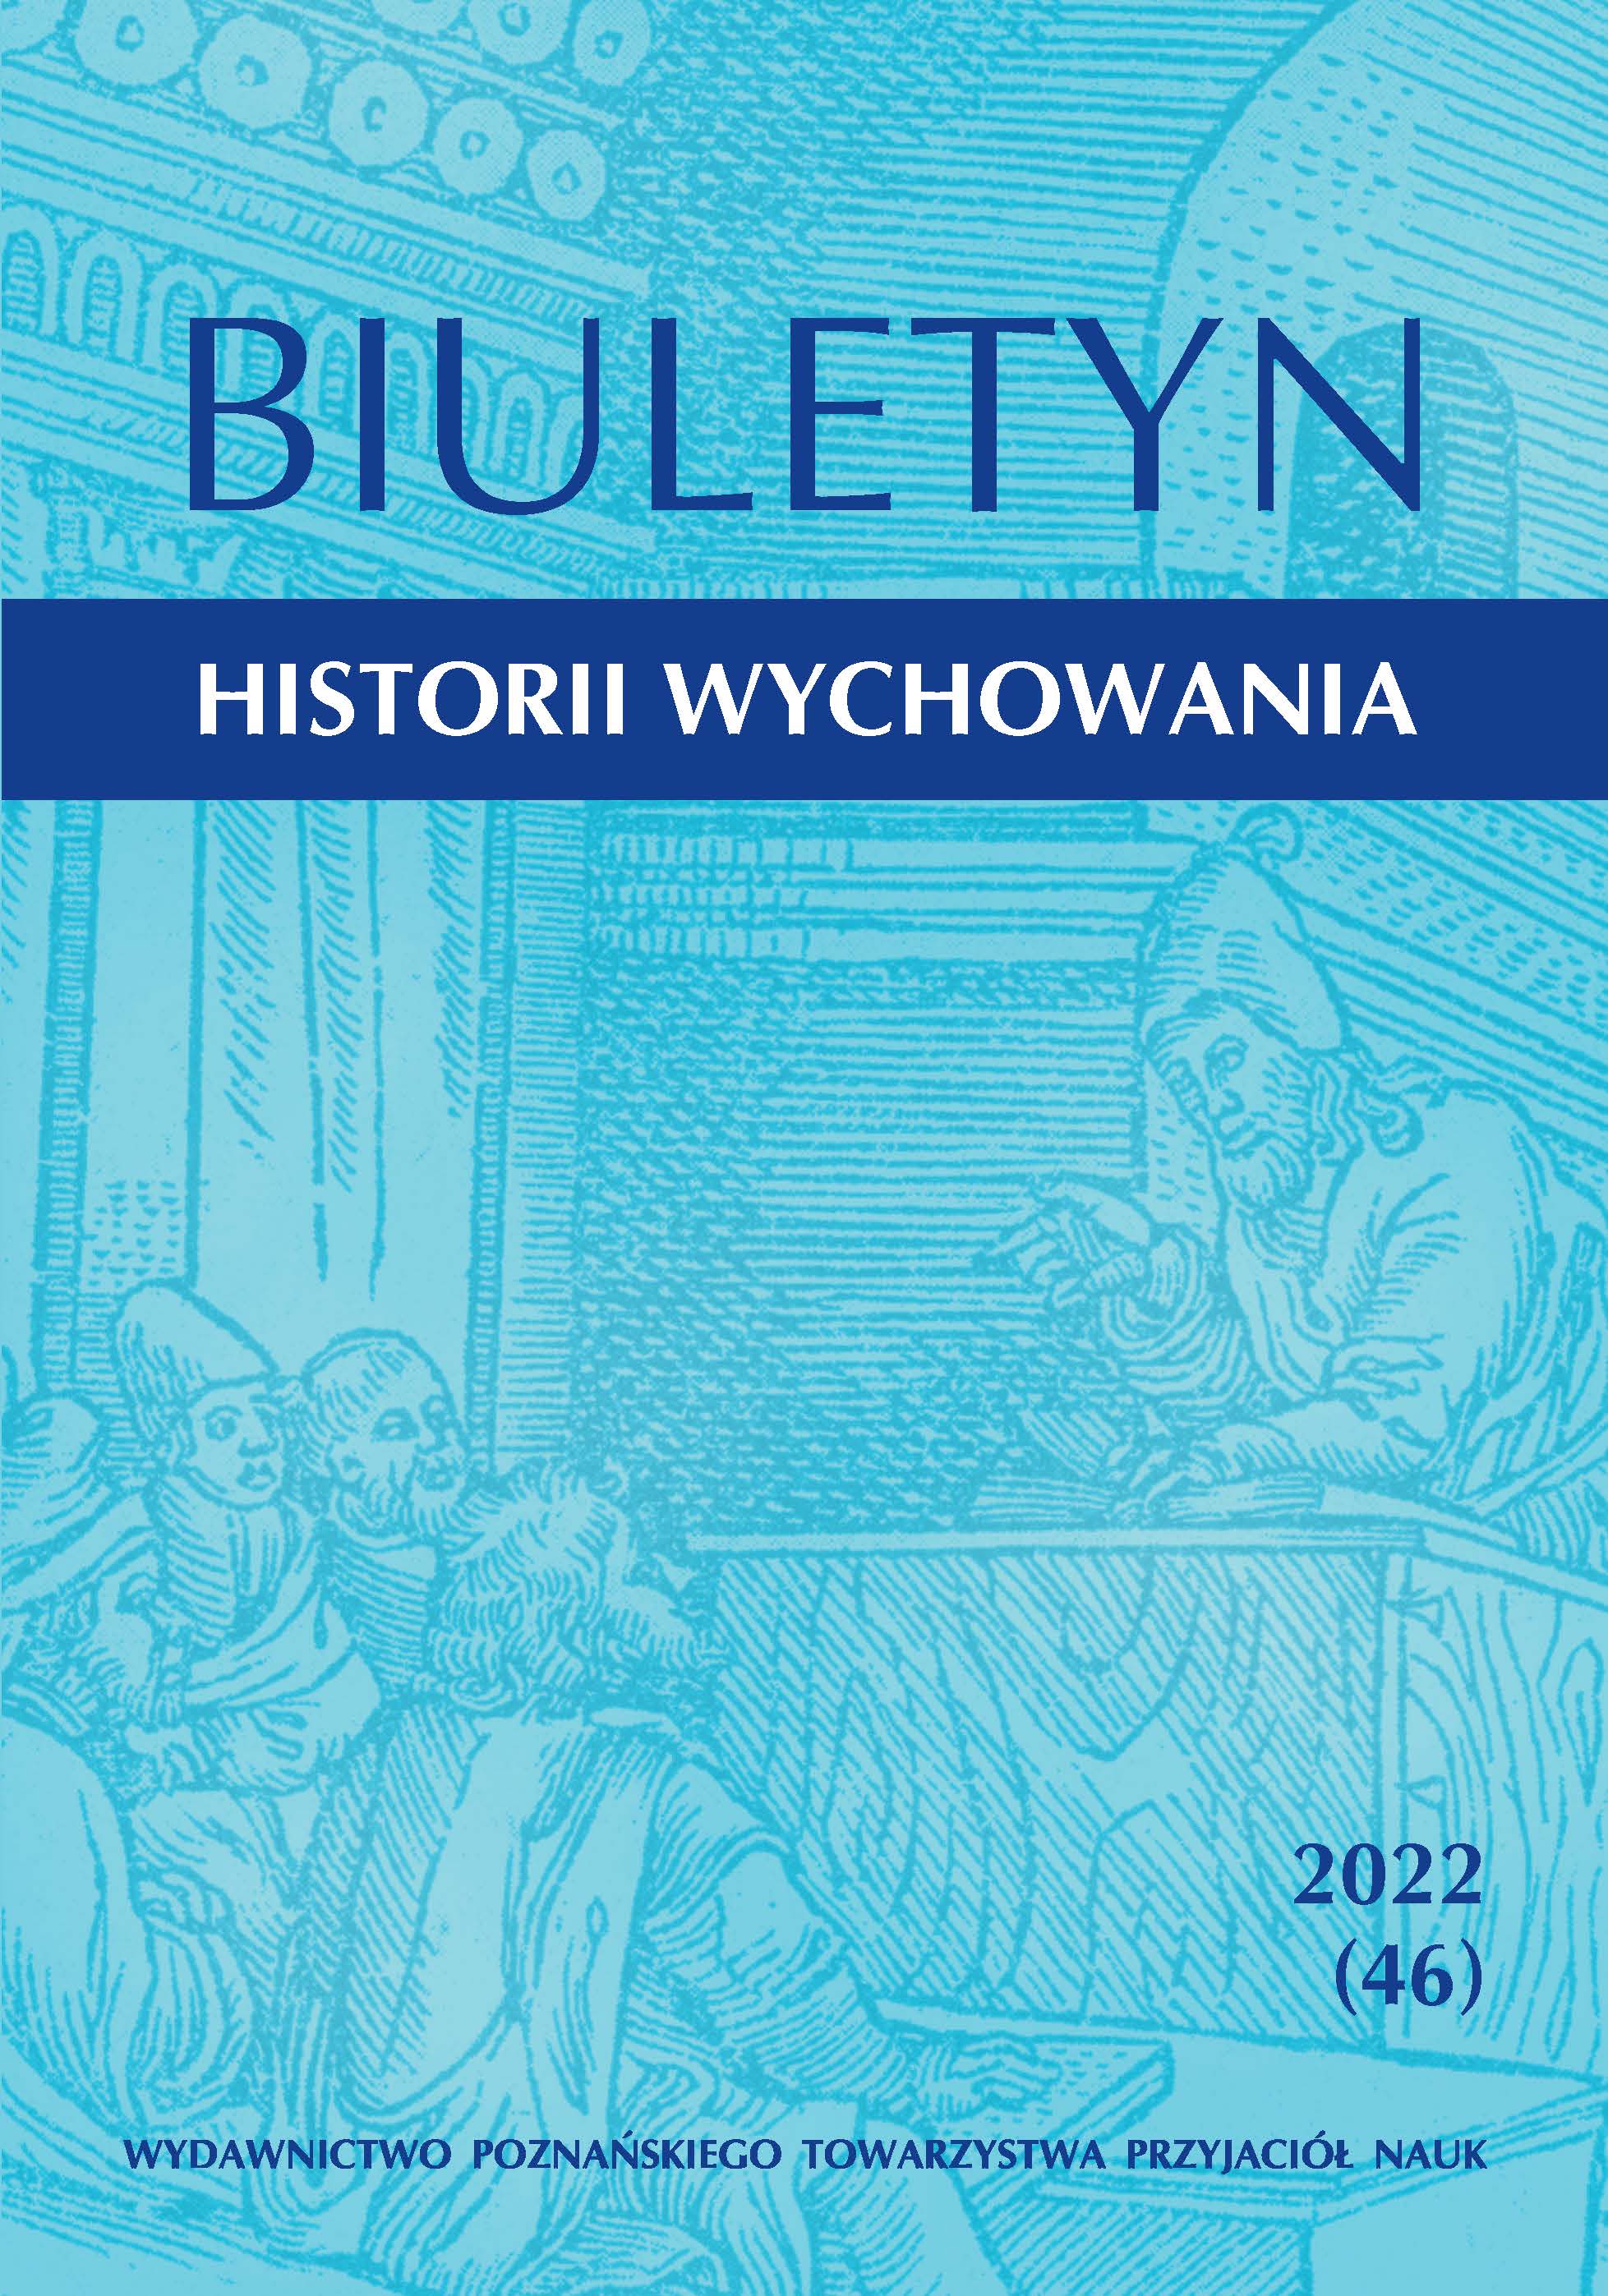 Women’s aspirations for access to academic education in Poland at the turn of the 20th century Cover Image